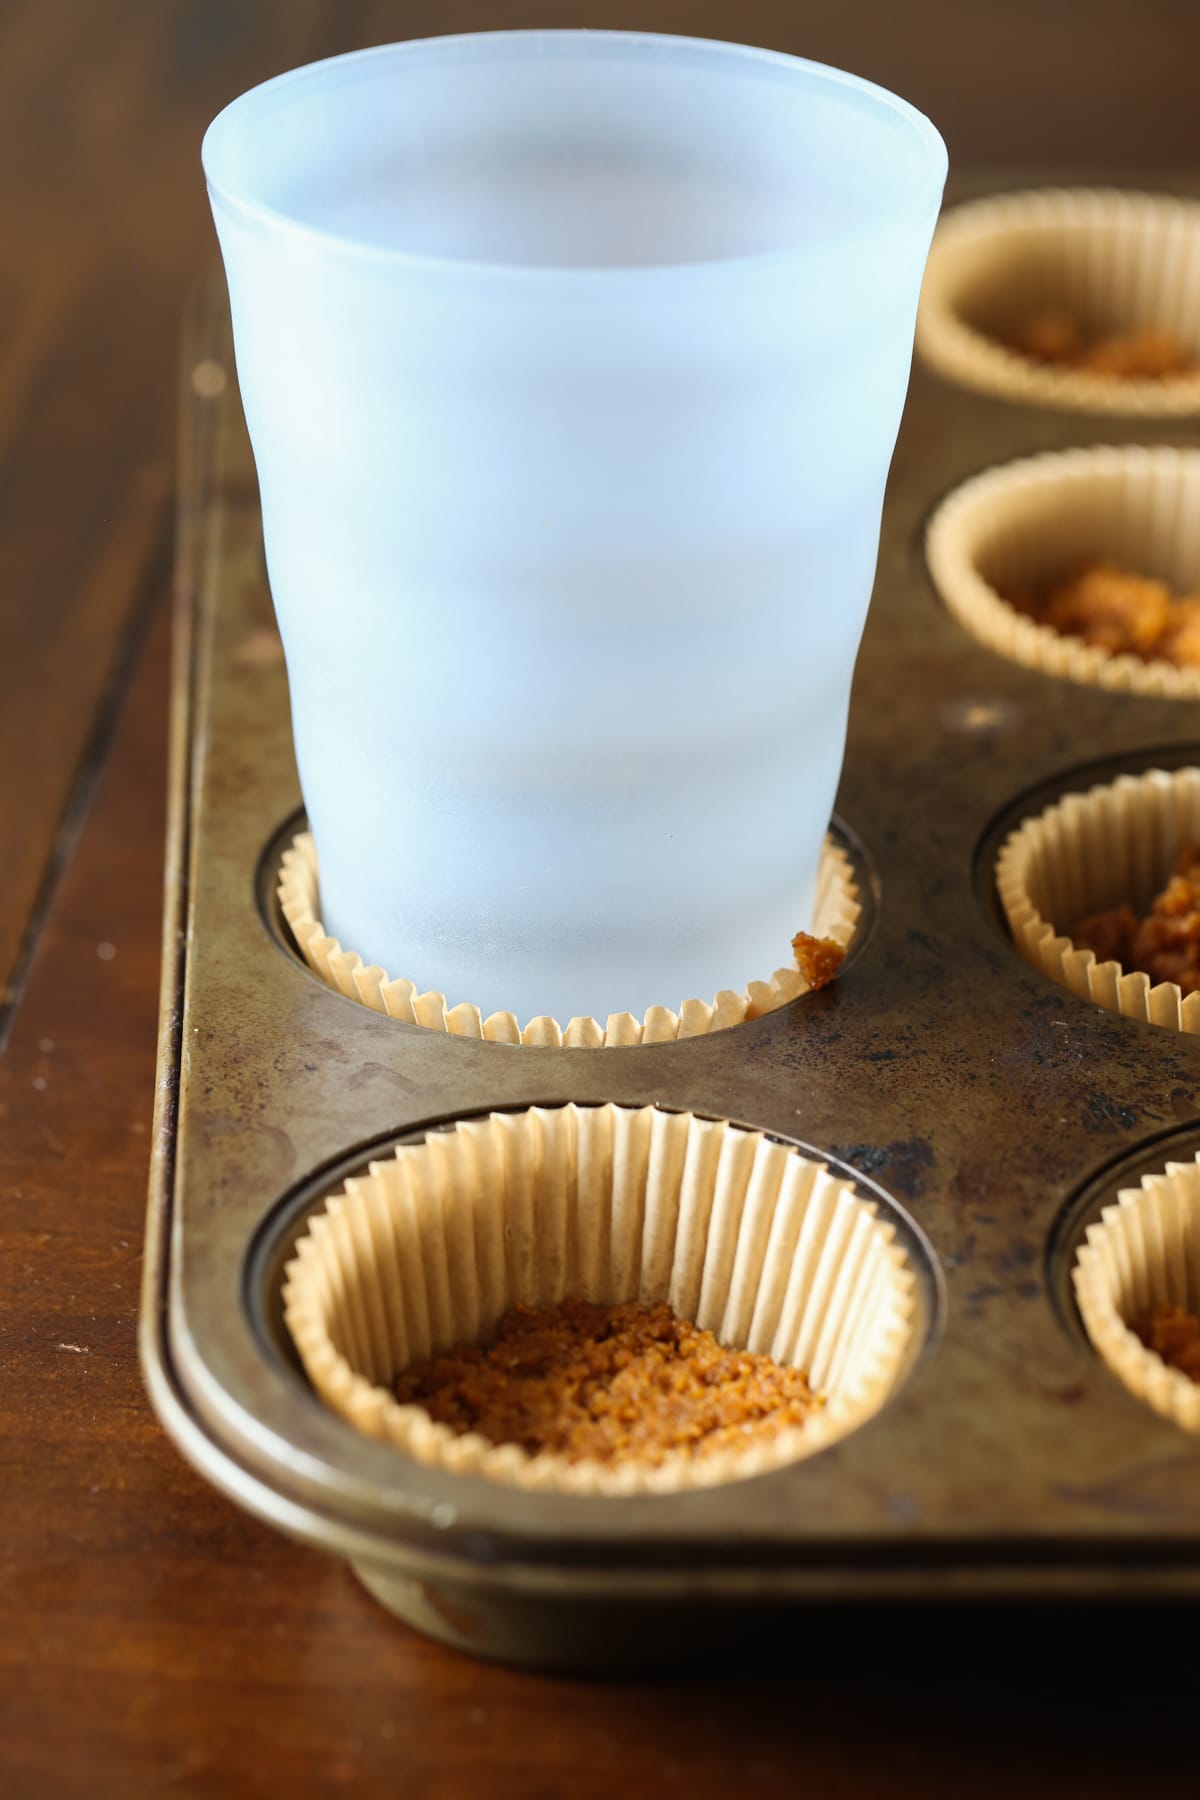 Pressing crust mixture into muffin liners with a cup.